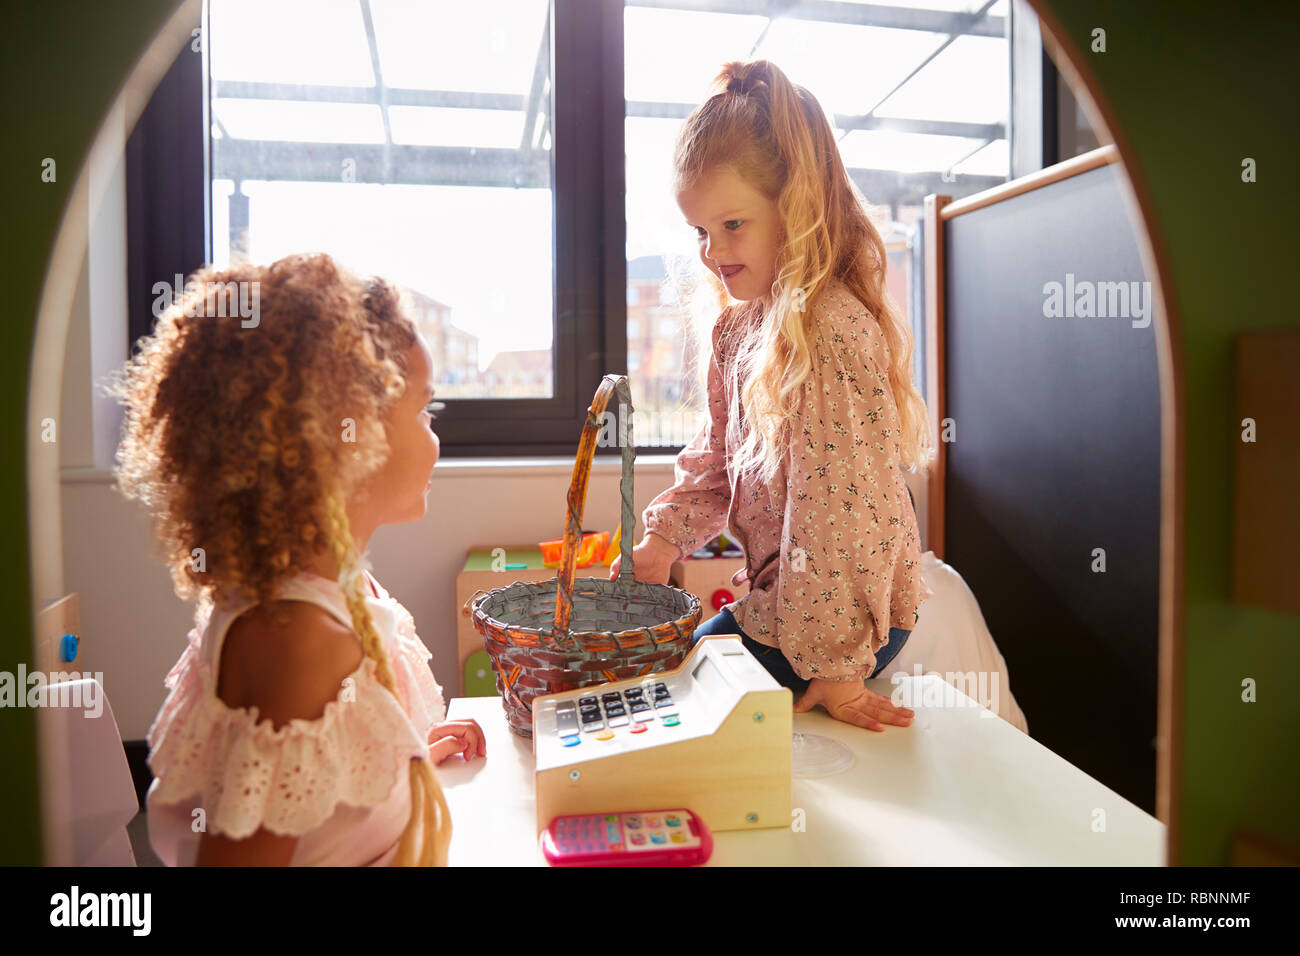 Two young schoolgirls playing shop in a playhouse at an infant school, backlit Stock Photo